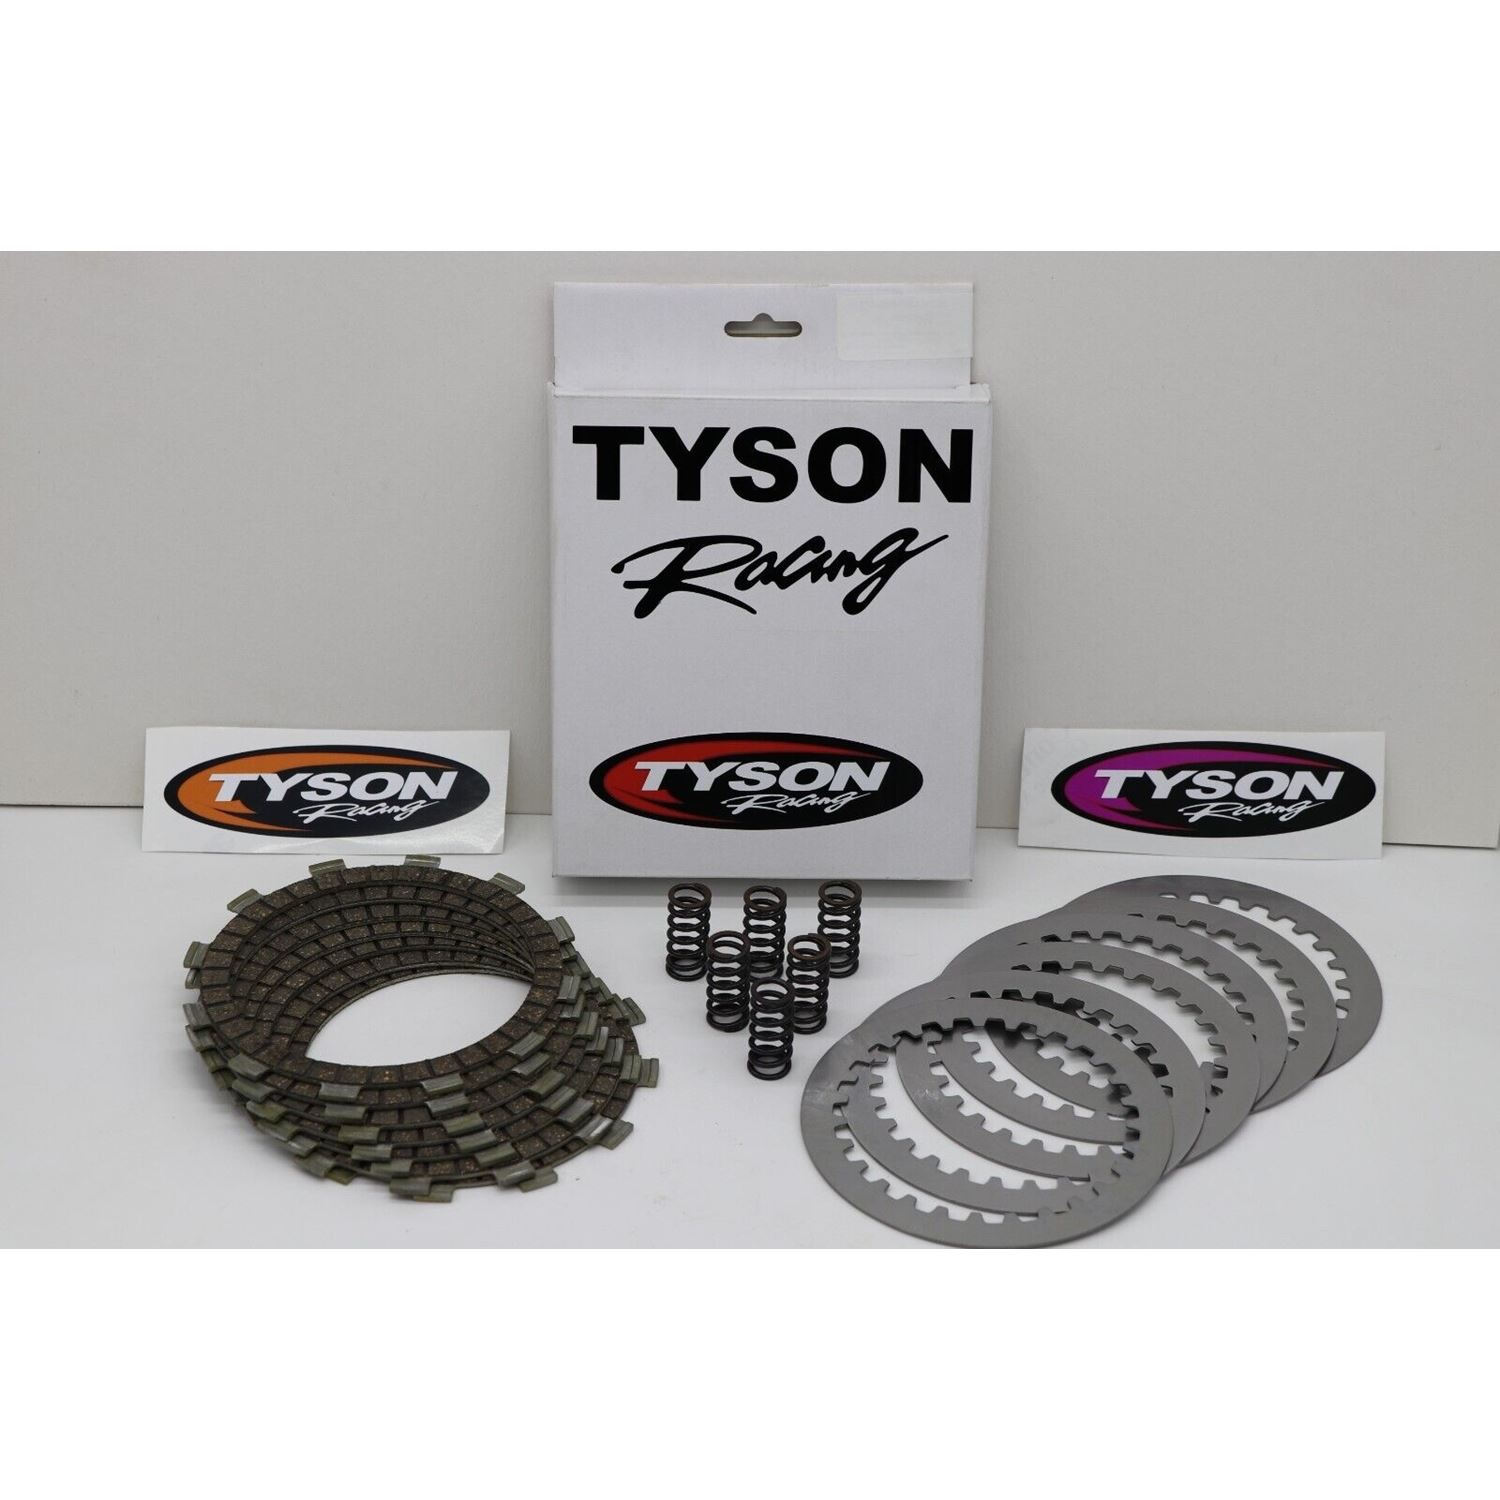 TYSON RACING clutch kit SMOOTH PLATES springs fibe